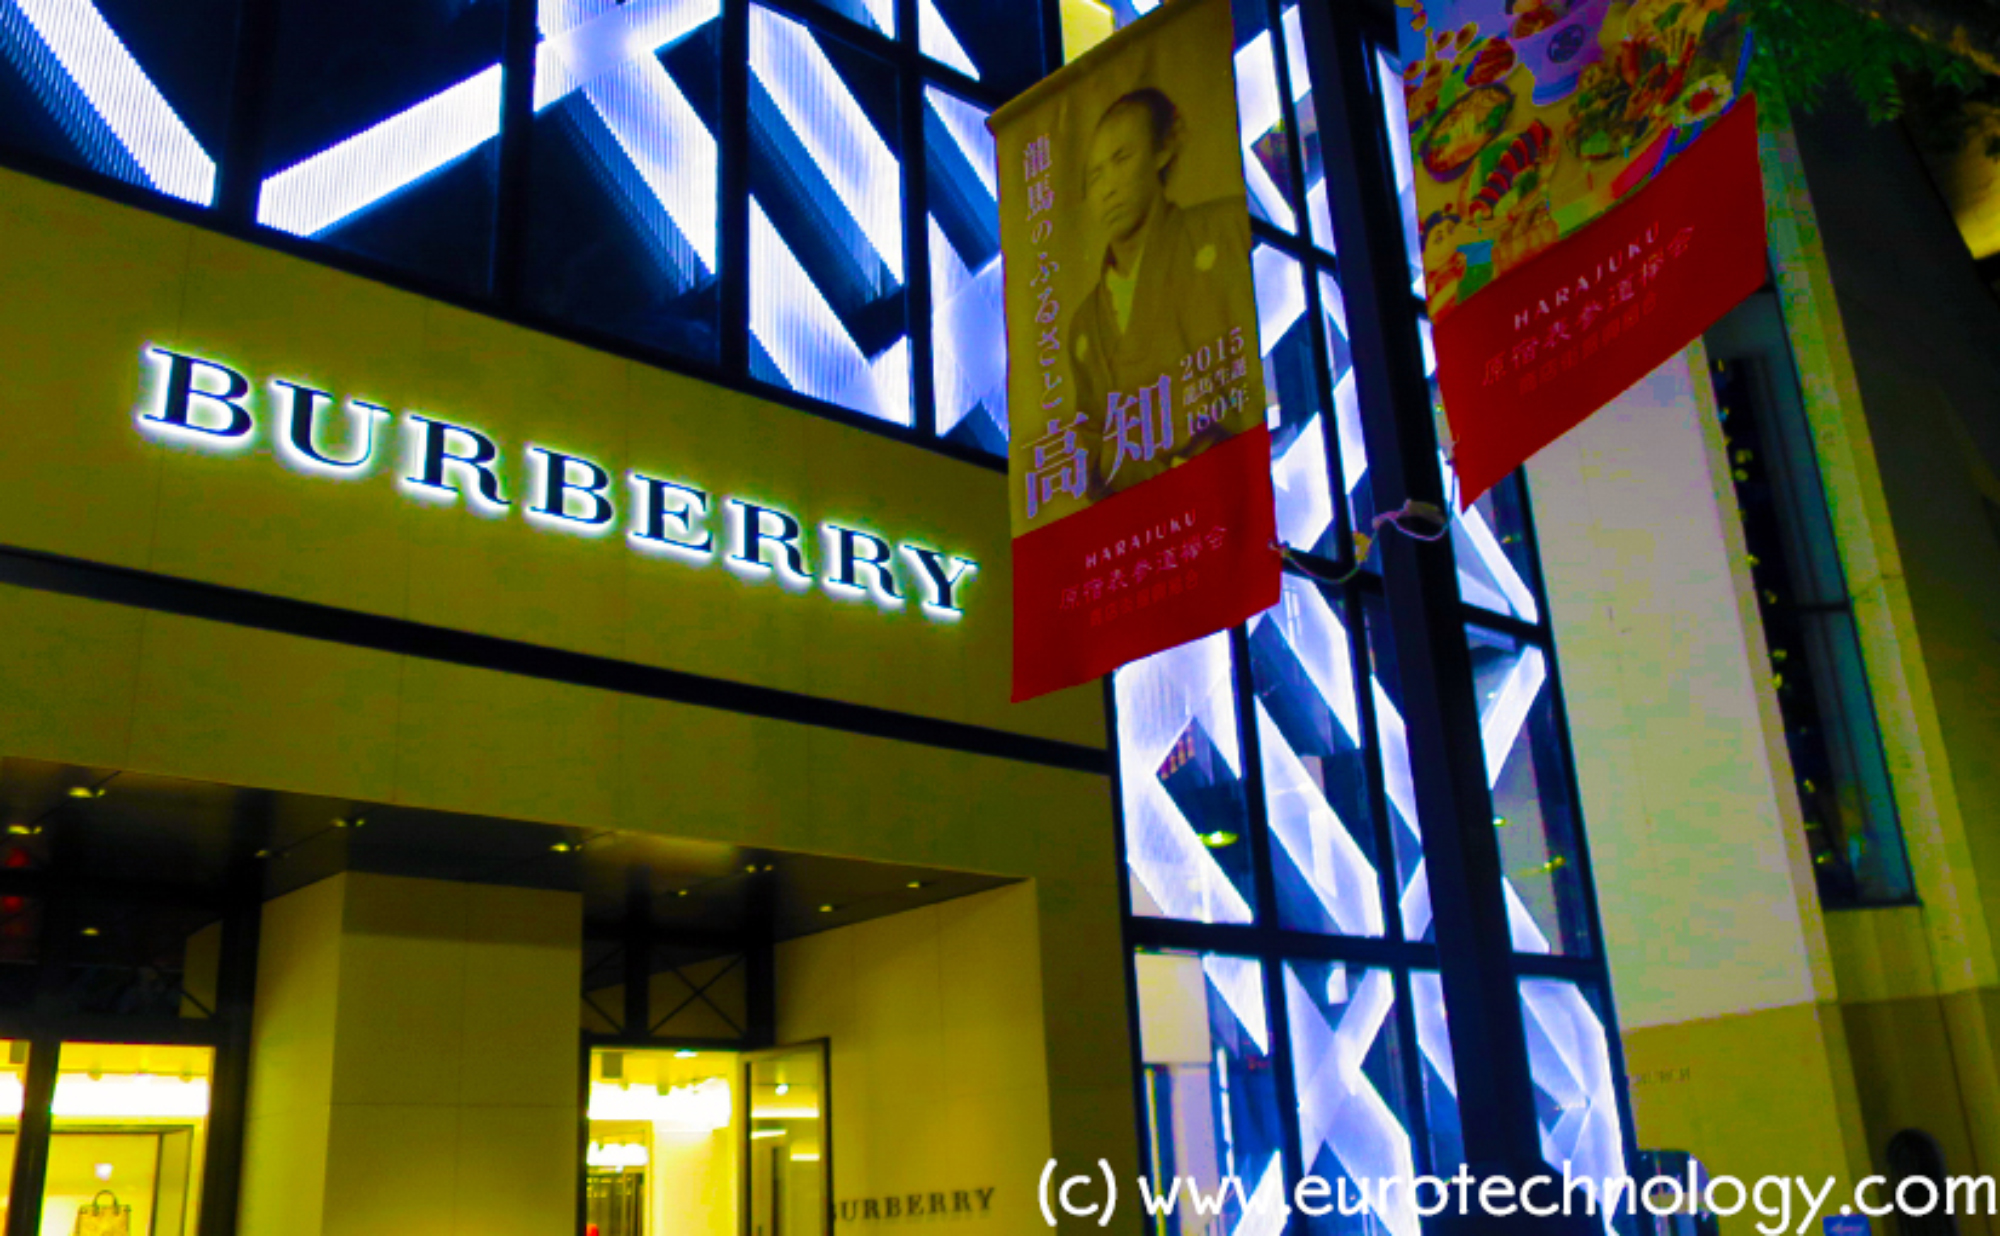 Burberry solves its “Japan problem”, at least for now